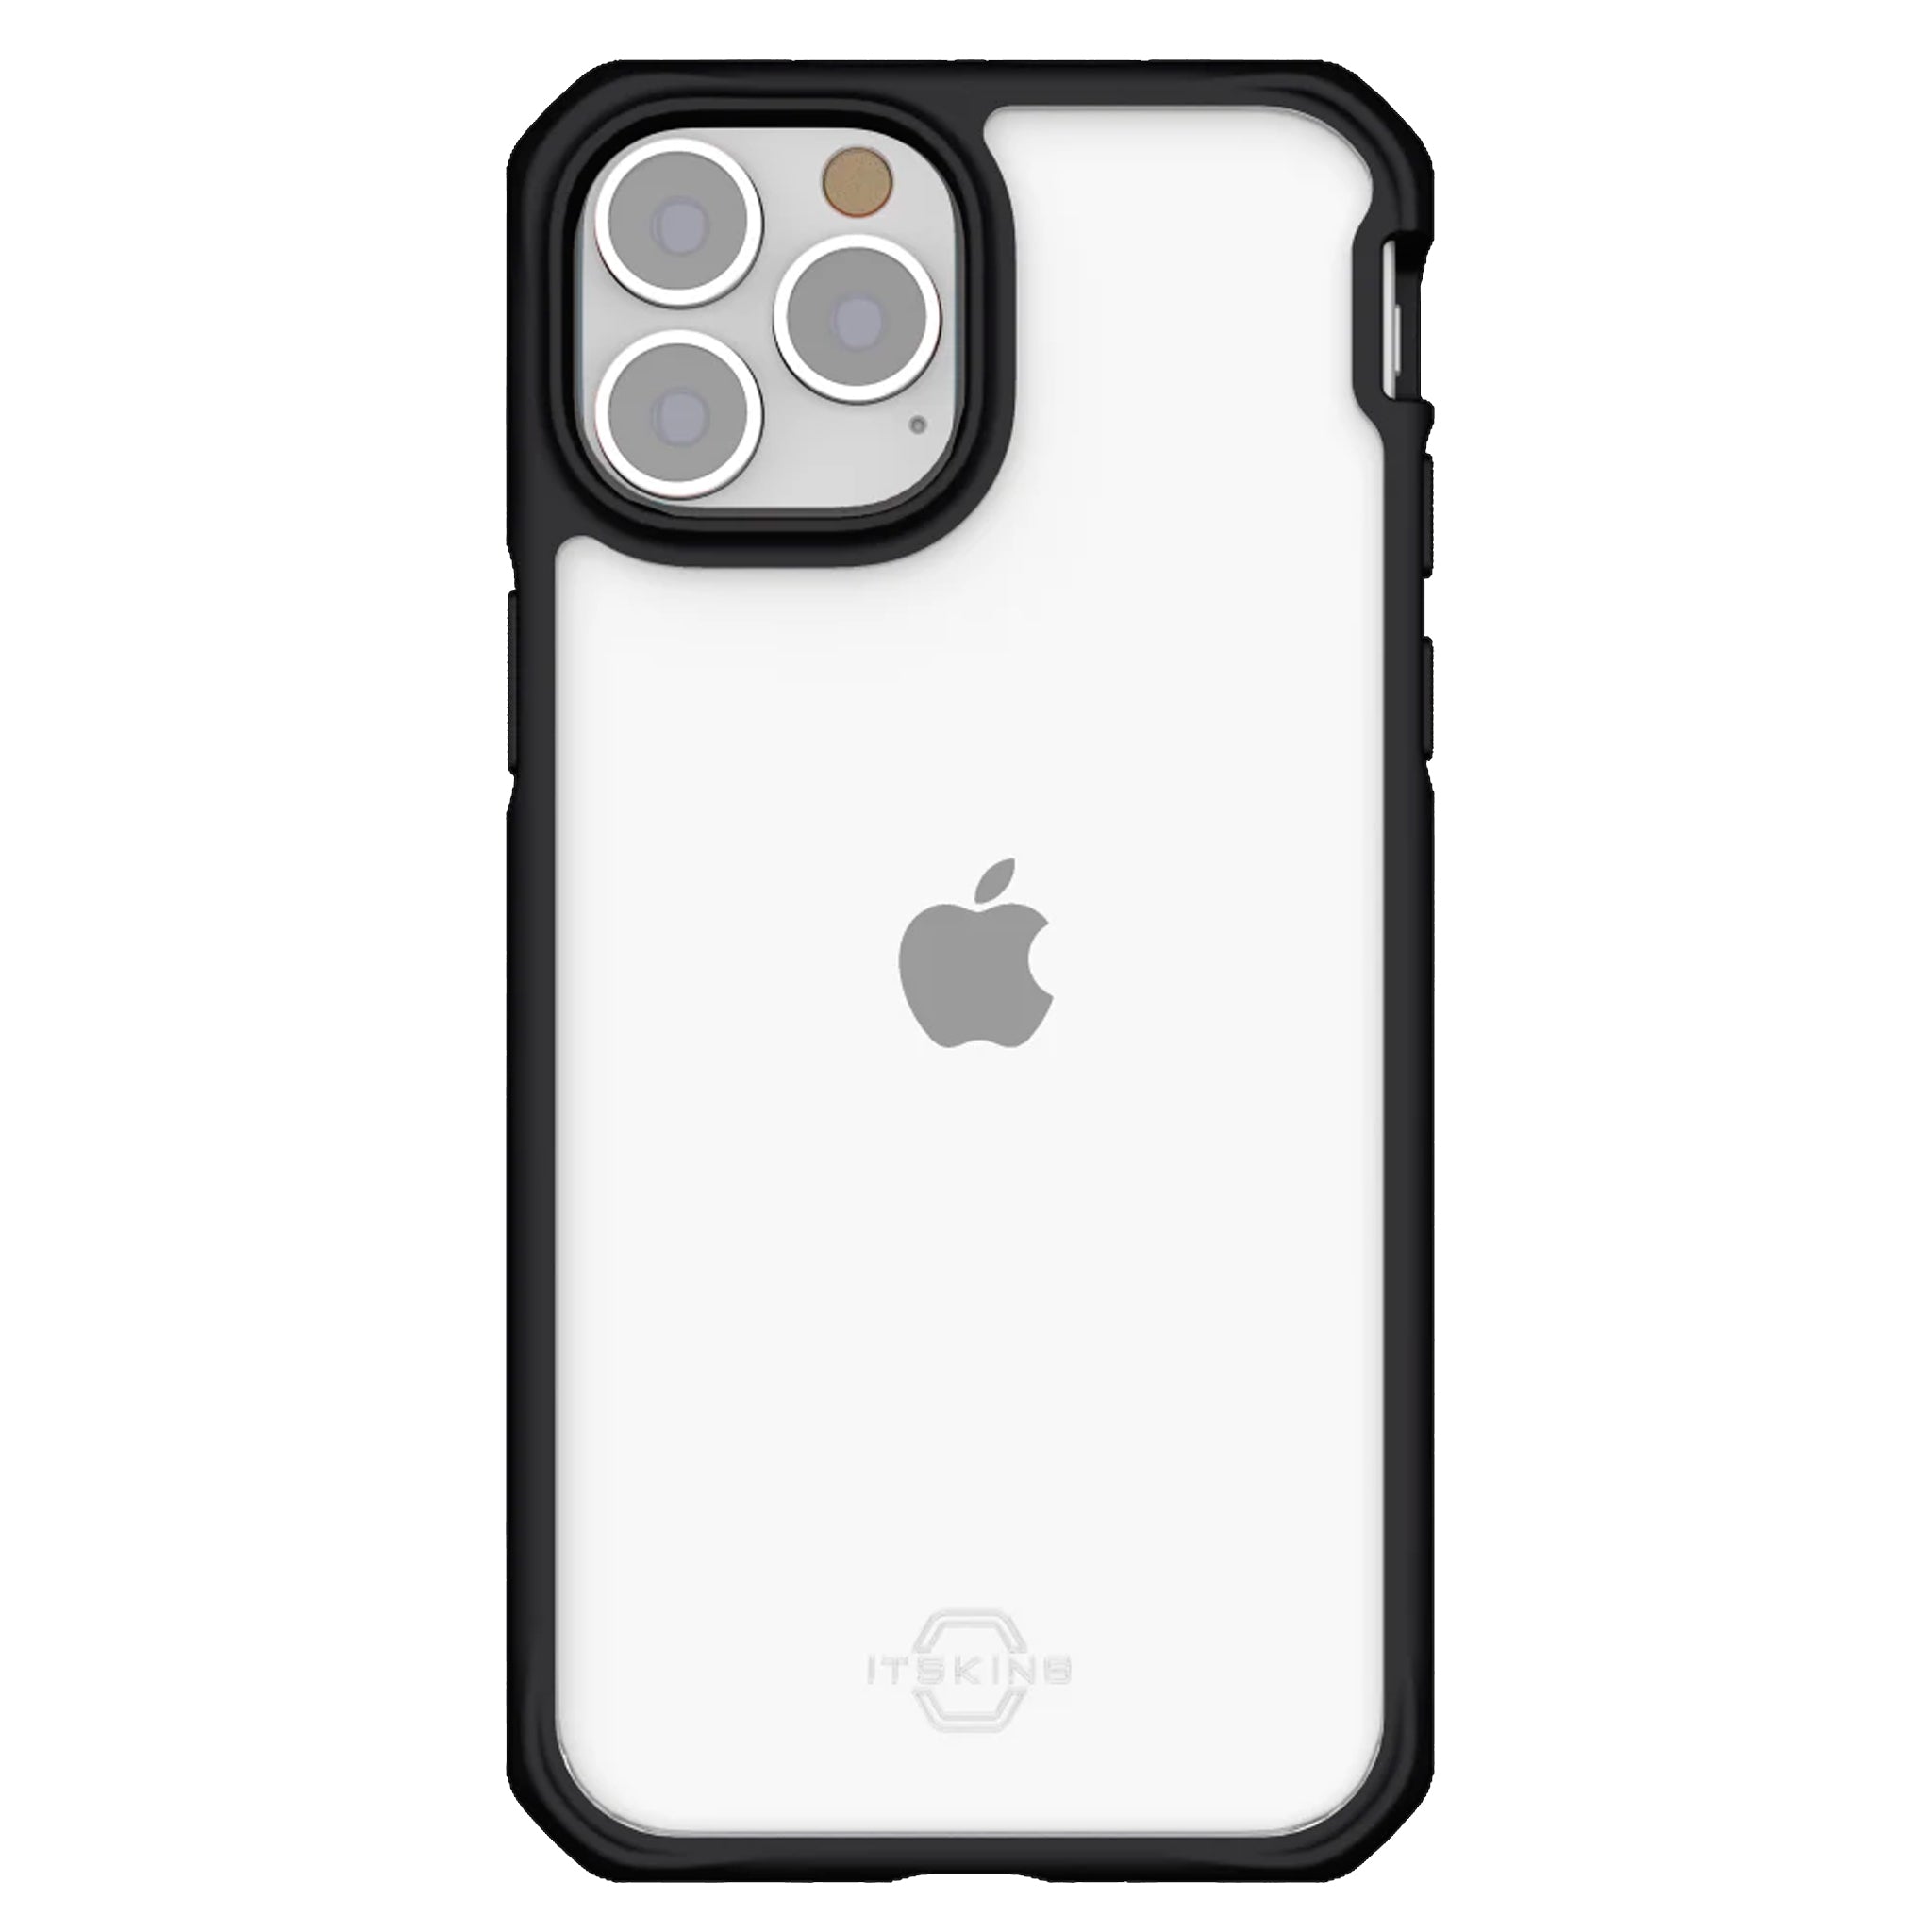 Itskins - Hybrid Solid Case For Apple Iphone 13 Pro Max / 12 Pro Max - Black And Transparent